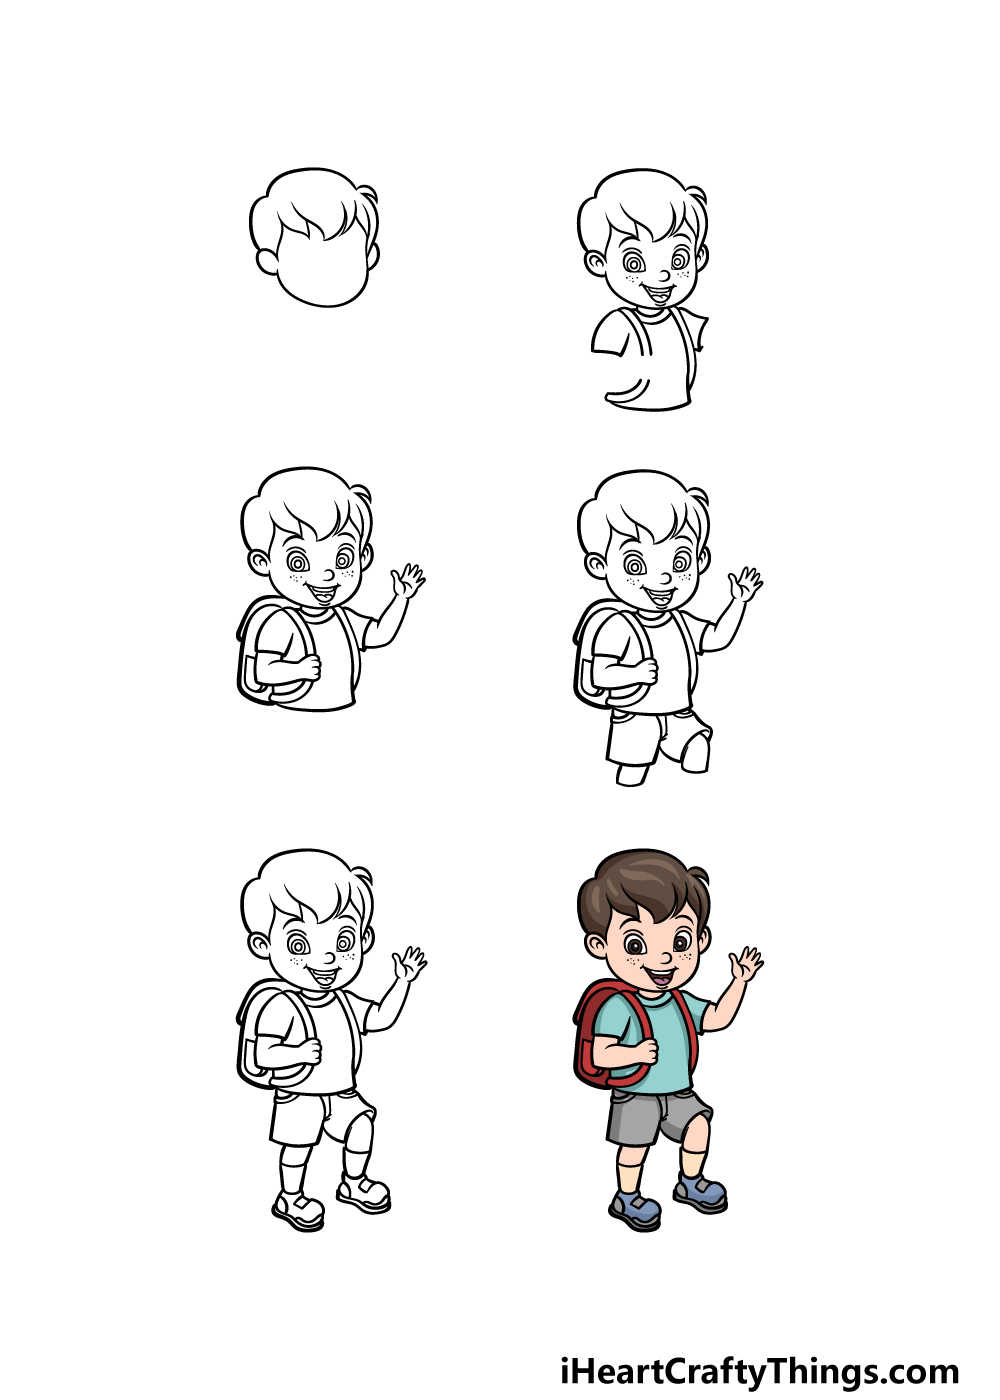 Little Boy Drawing - How To Draw A Little Boy Step By Step